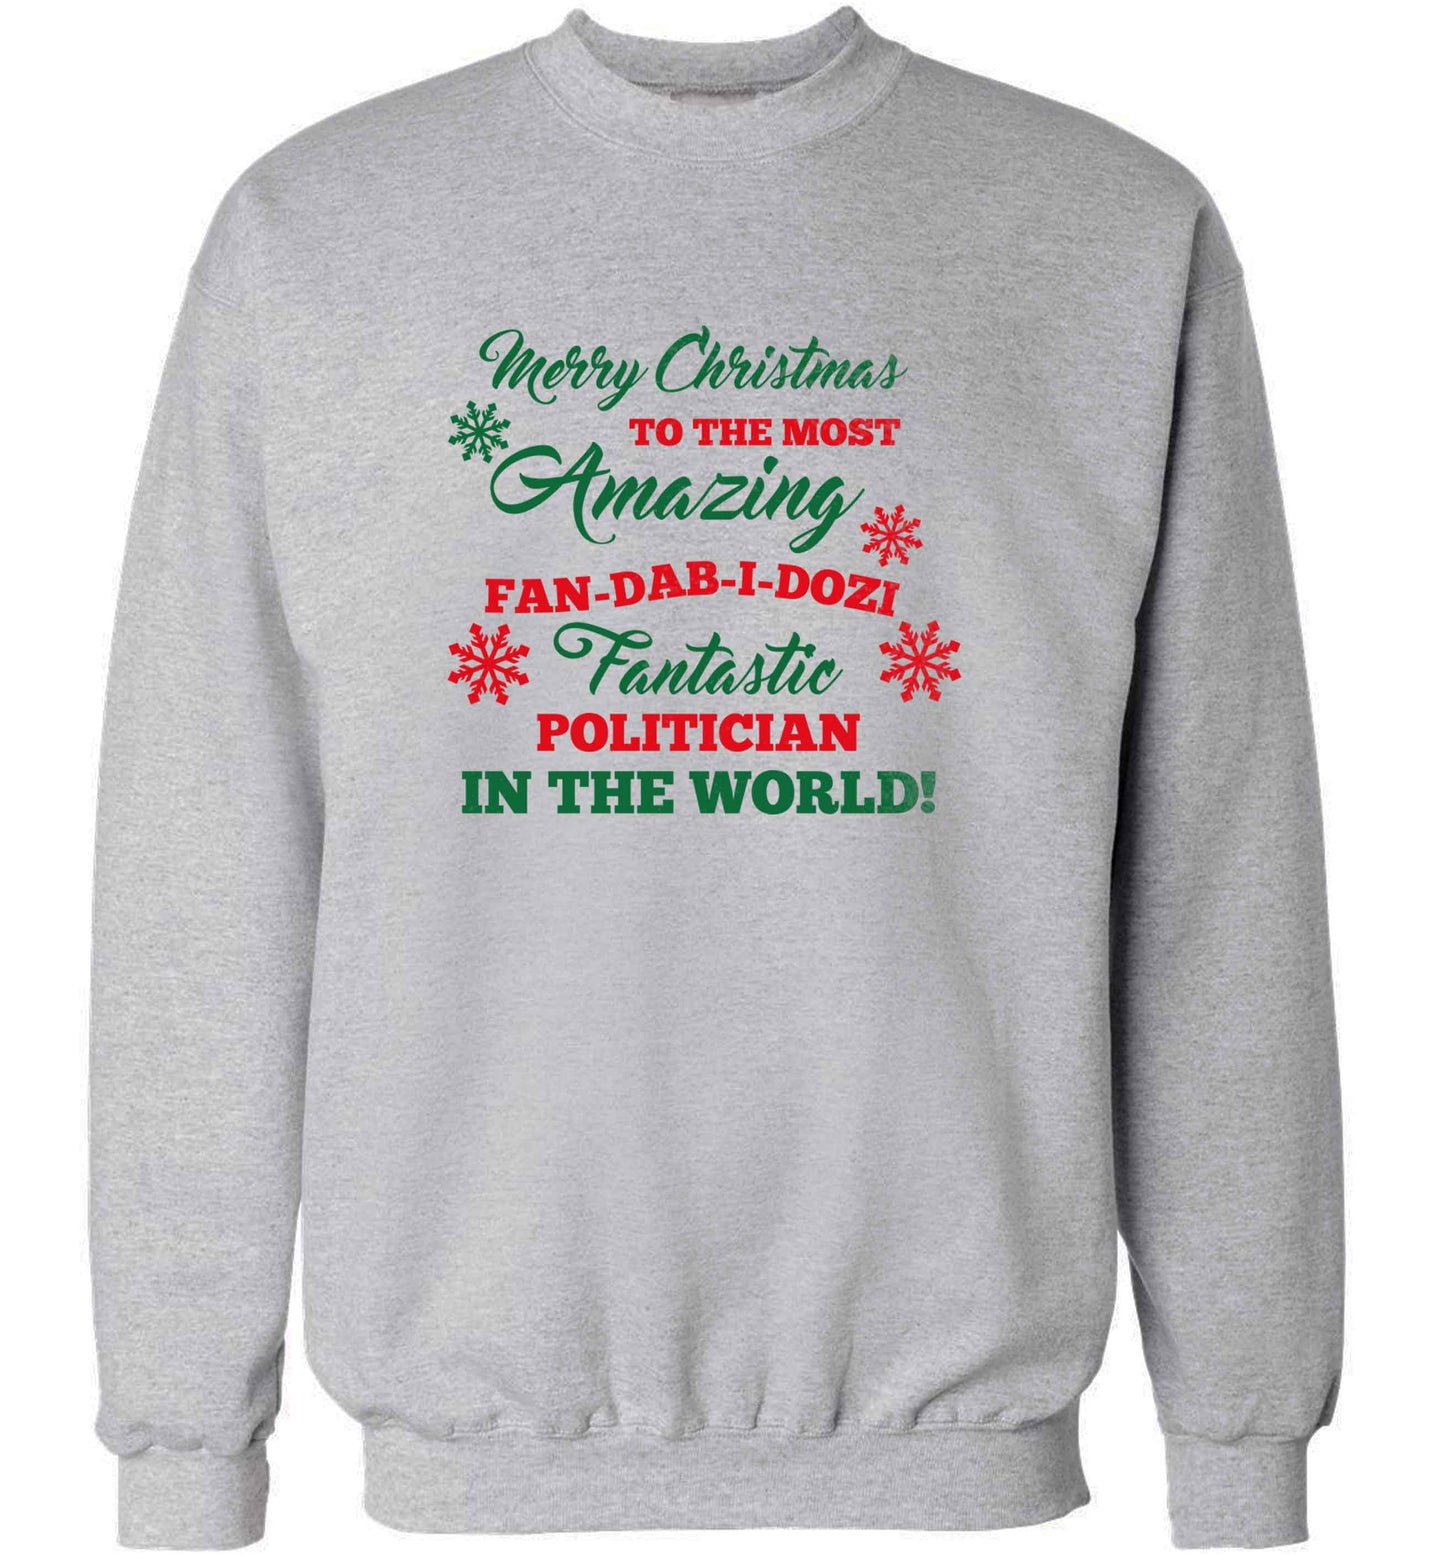 Merry Christmas to the most amazing politician in the world! adult's unisex grey sweater 2XL